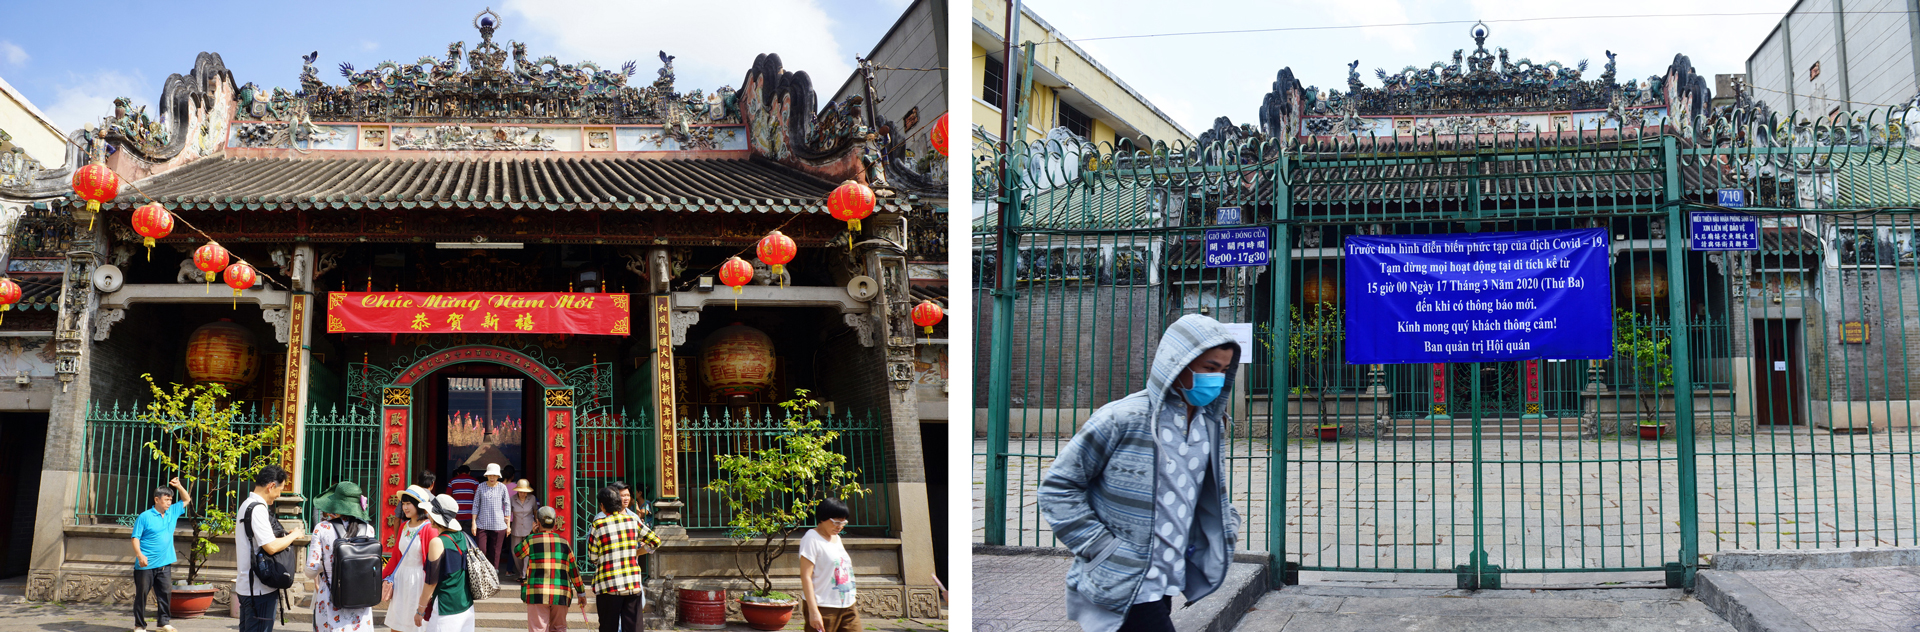 Ba Thien Hau Temple in Ho Chi Minh City, Vietnam before (left) and after (right) it stopped receiving visitors from March 17, 2020 due to the COVID-19 epidemic. Photos: Nguyen Cong Thanh - Truc Phuong / Tuoi Tre